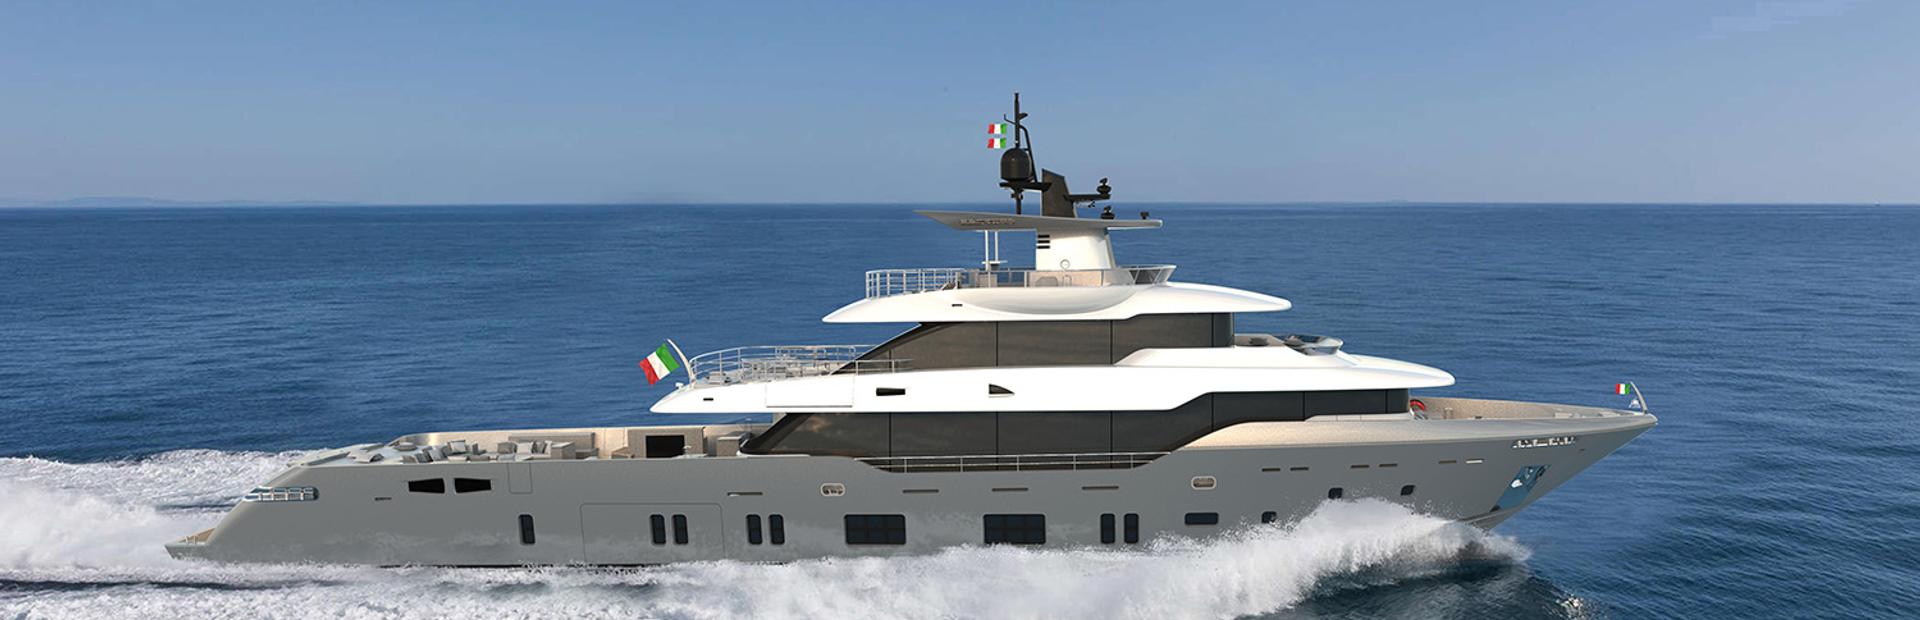 Oceanic 140 Fast Expedition Yacht